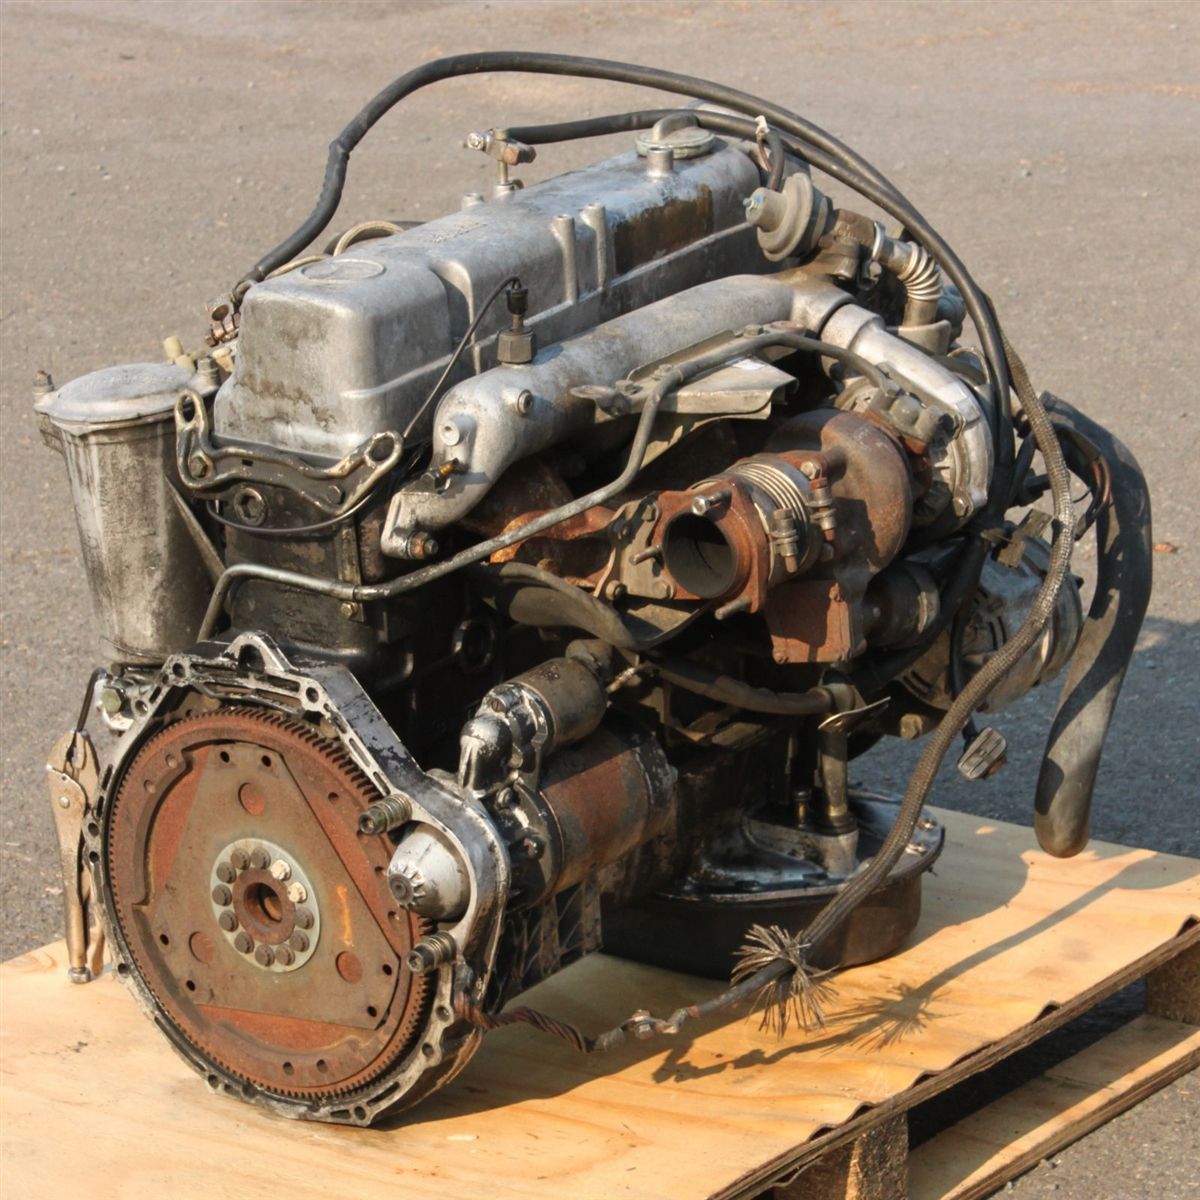 6 Most Reliable Mercedes-Benz Engines Ever Built (6 To Stay Away From)